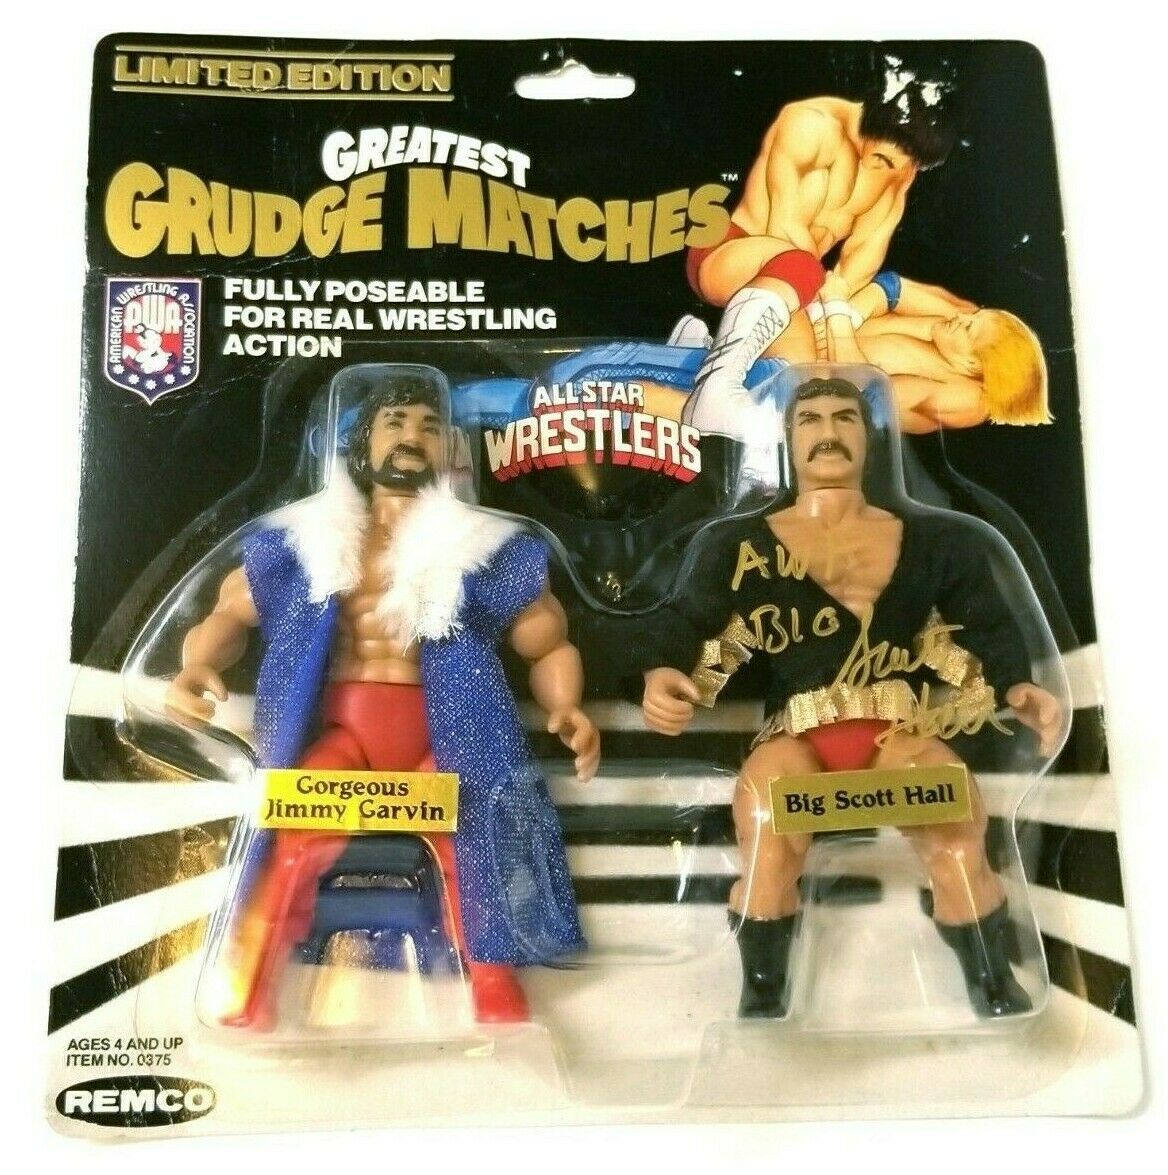 1986 AWA Remco All Star Wrestlers Series 4 "Greatest Grudge Matches" Gorgeous Jimmy Garvin vs. Big Scott Hall